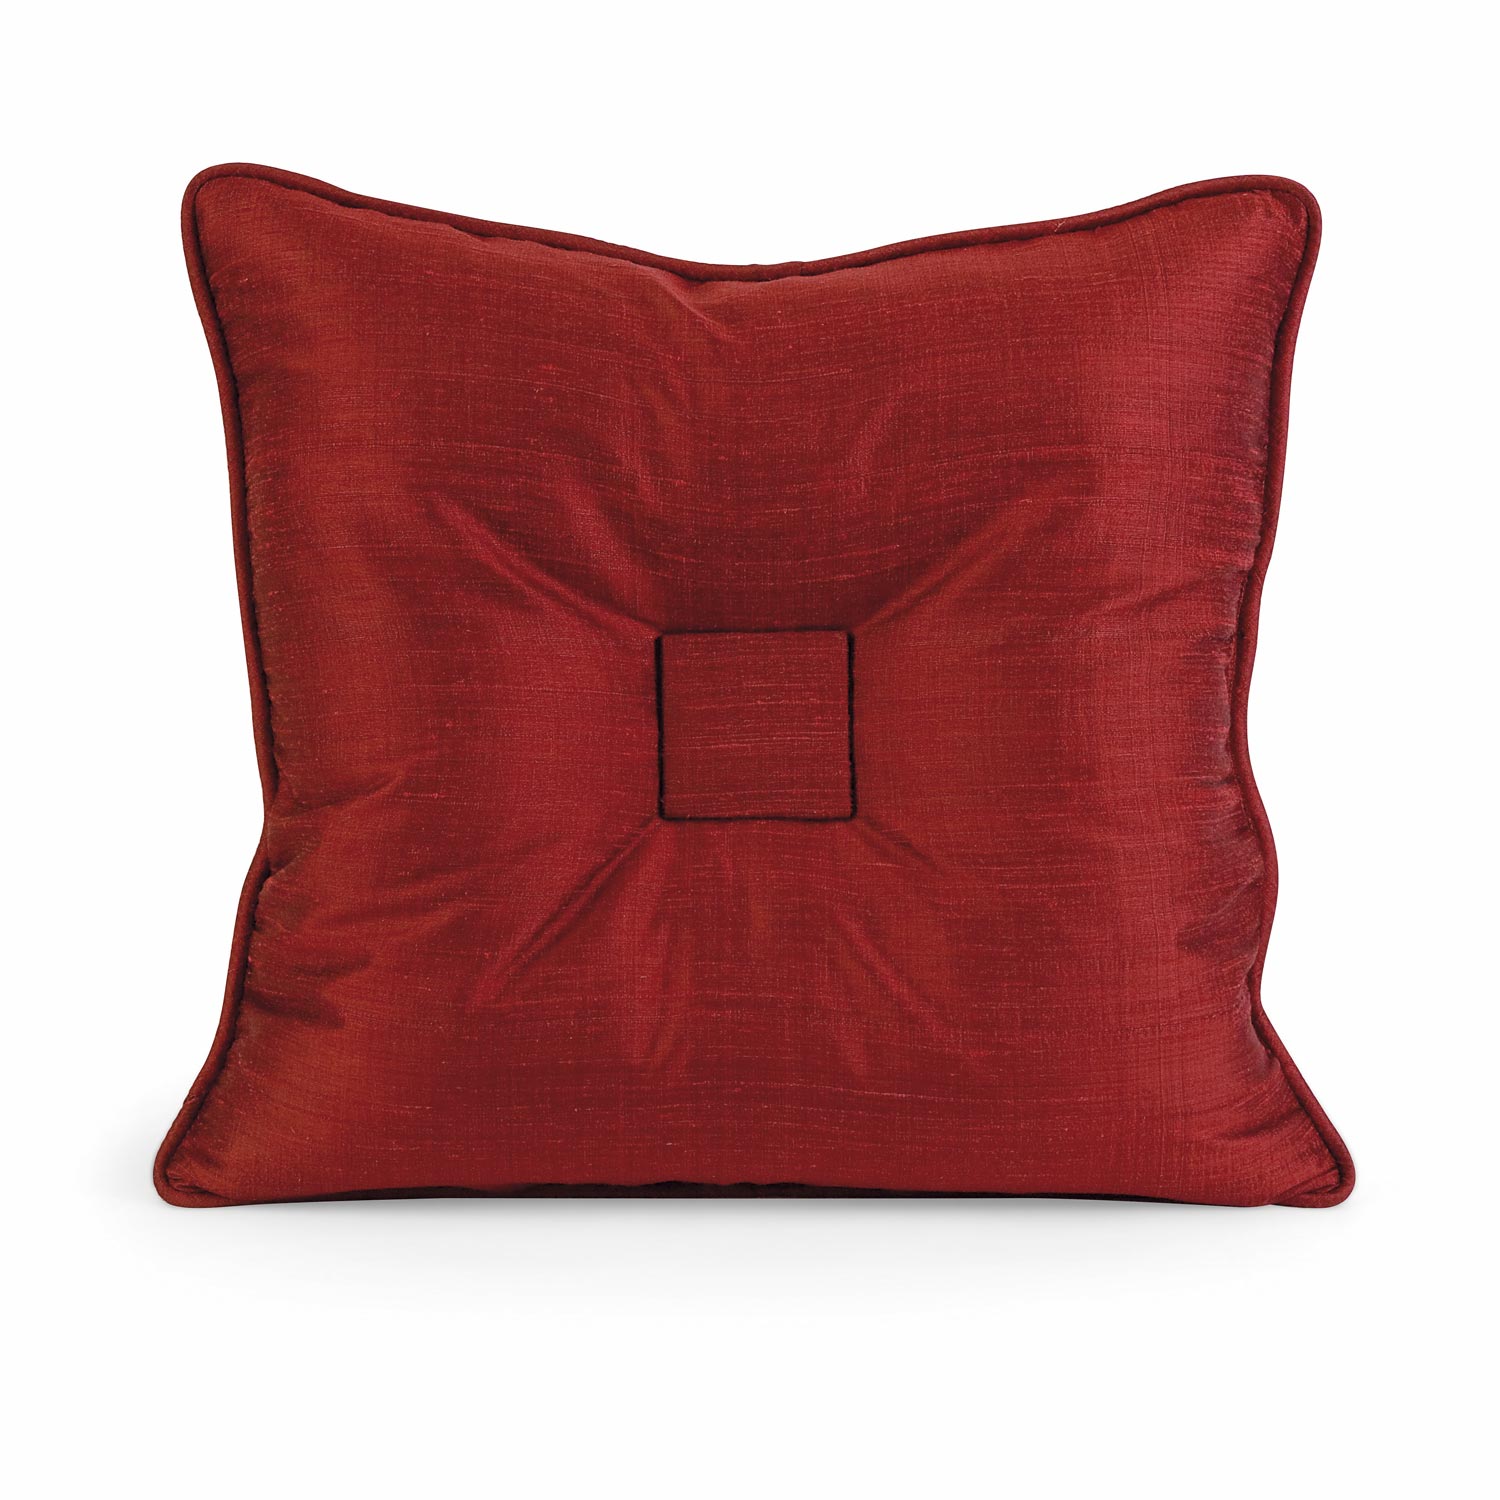 IMAX Ik Paola Thai Silk Pillow with Down Fill